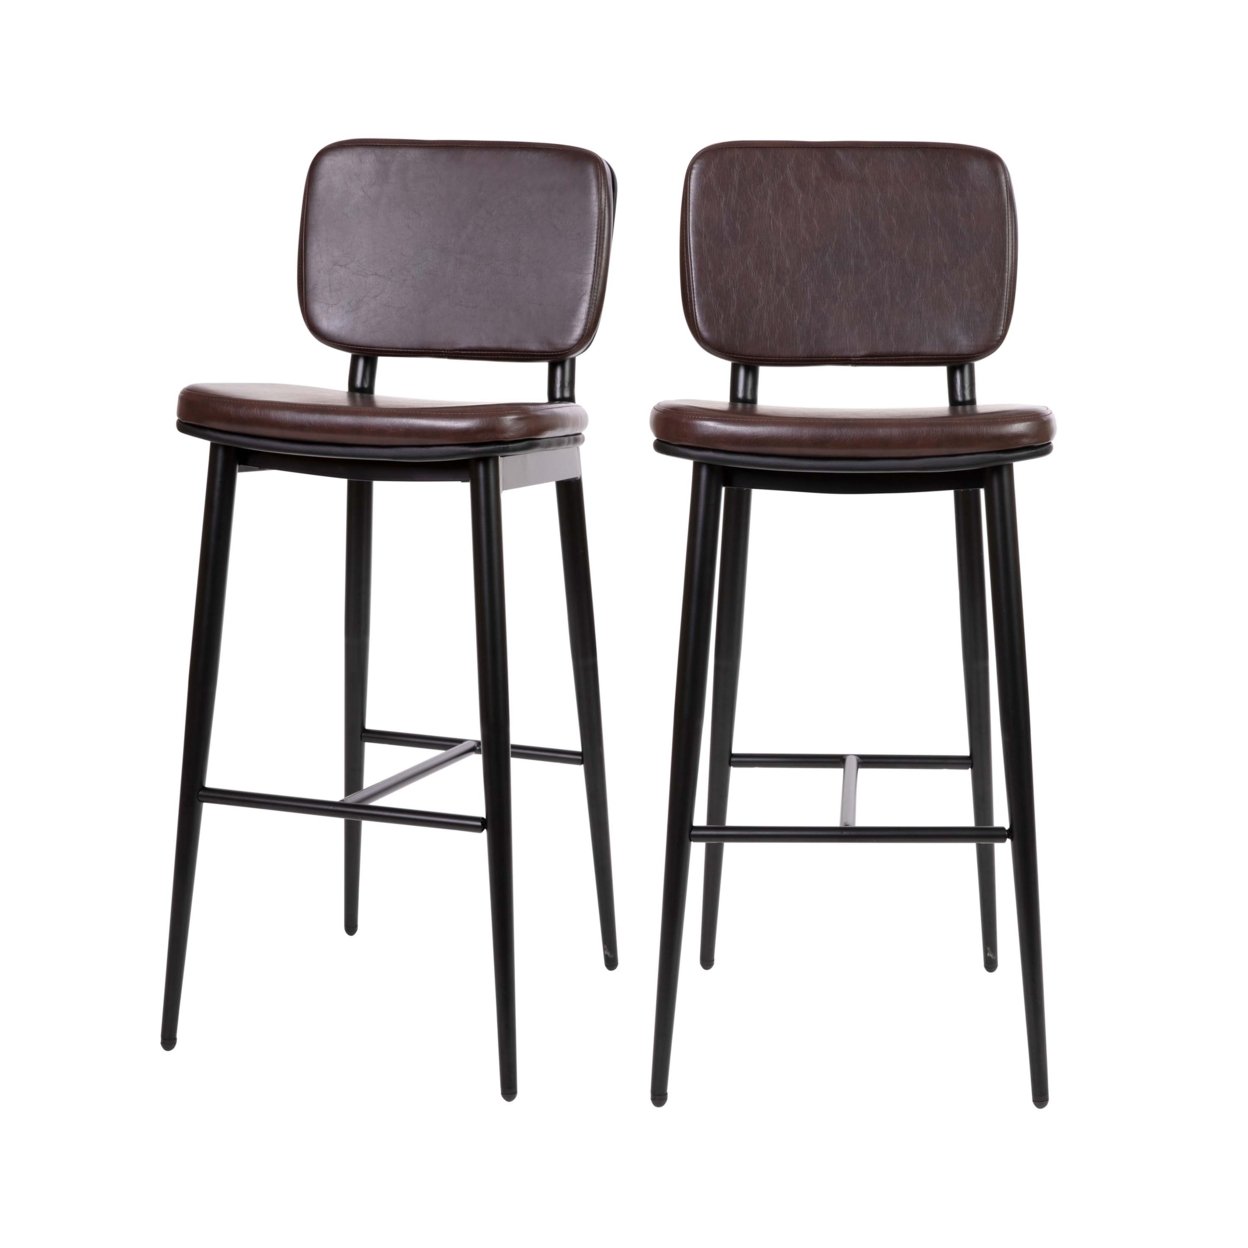 Kenzie Commercial Grade Mid-Back Barstools - Brown LeatherSoft Upholstery - Black Iron Frame With Integrated Footrest - Set Of 2